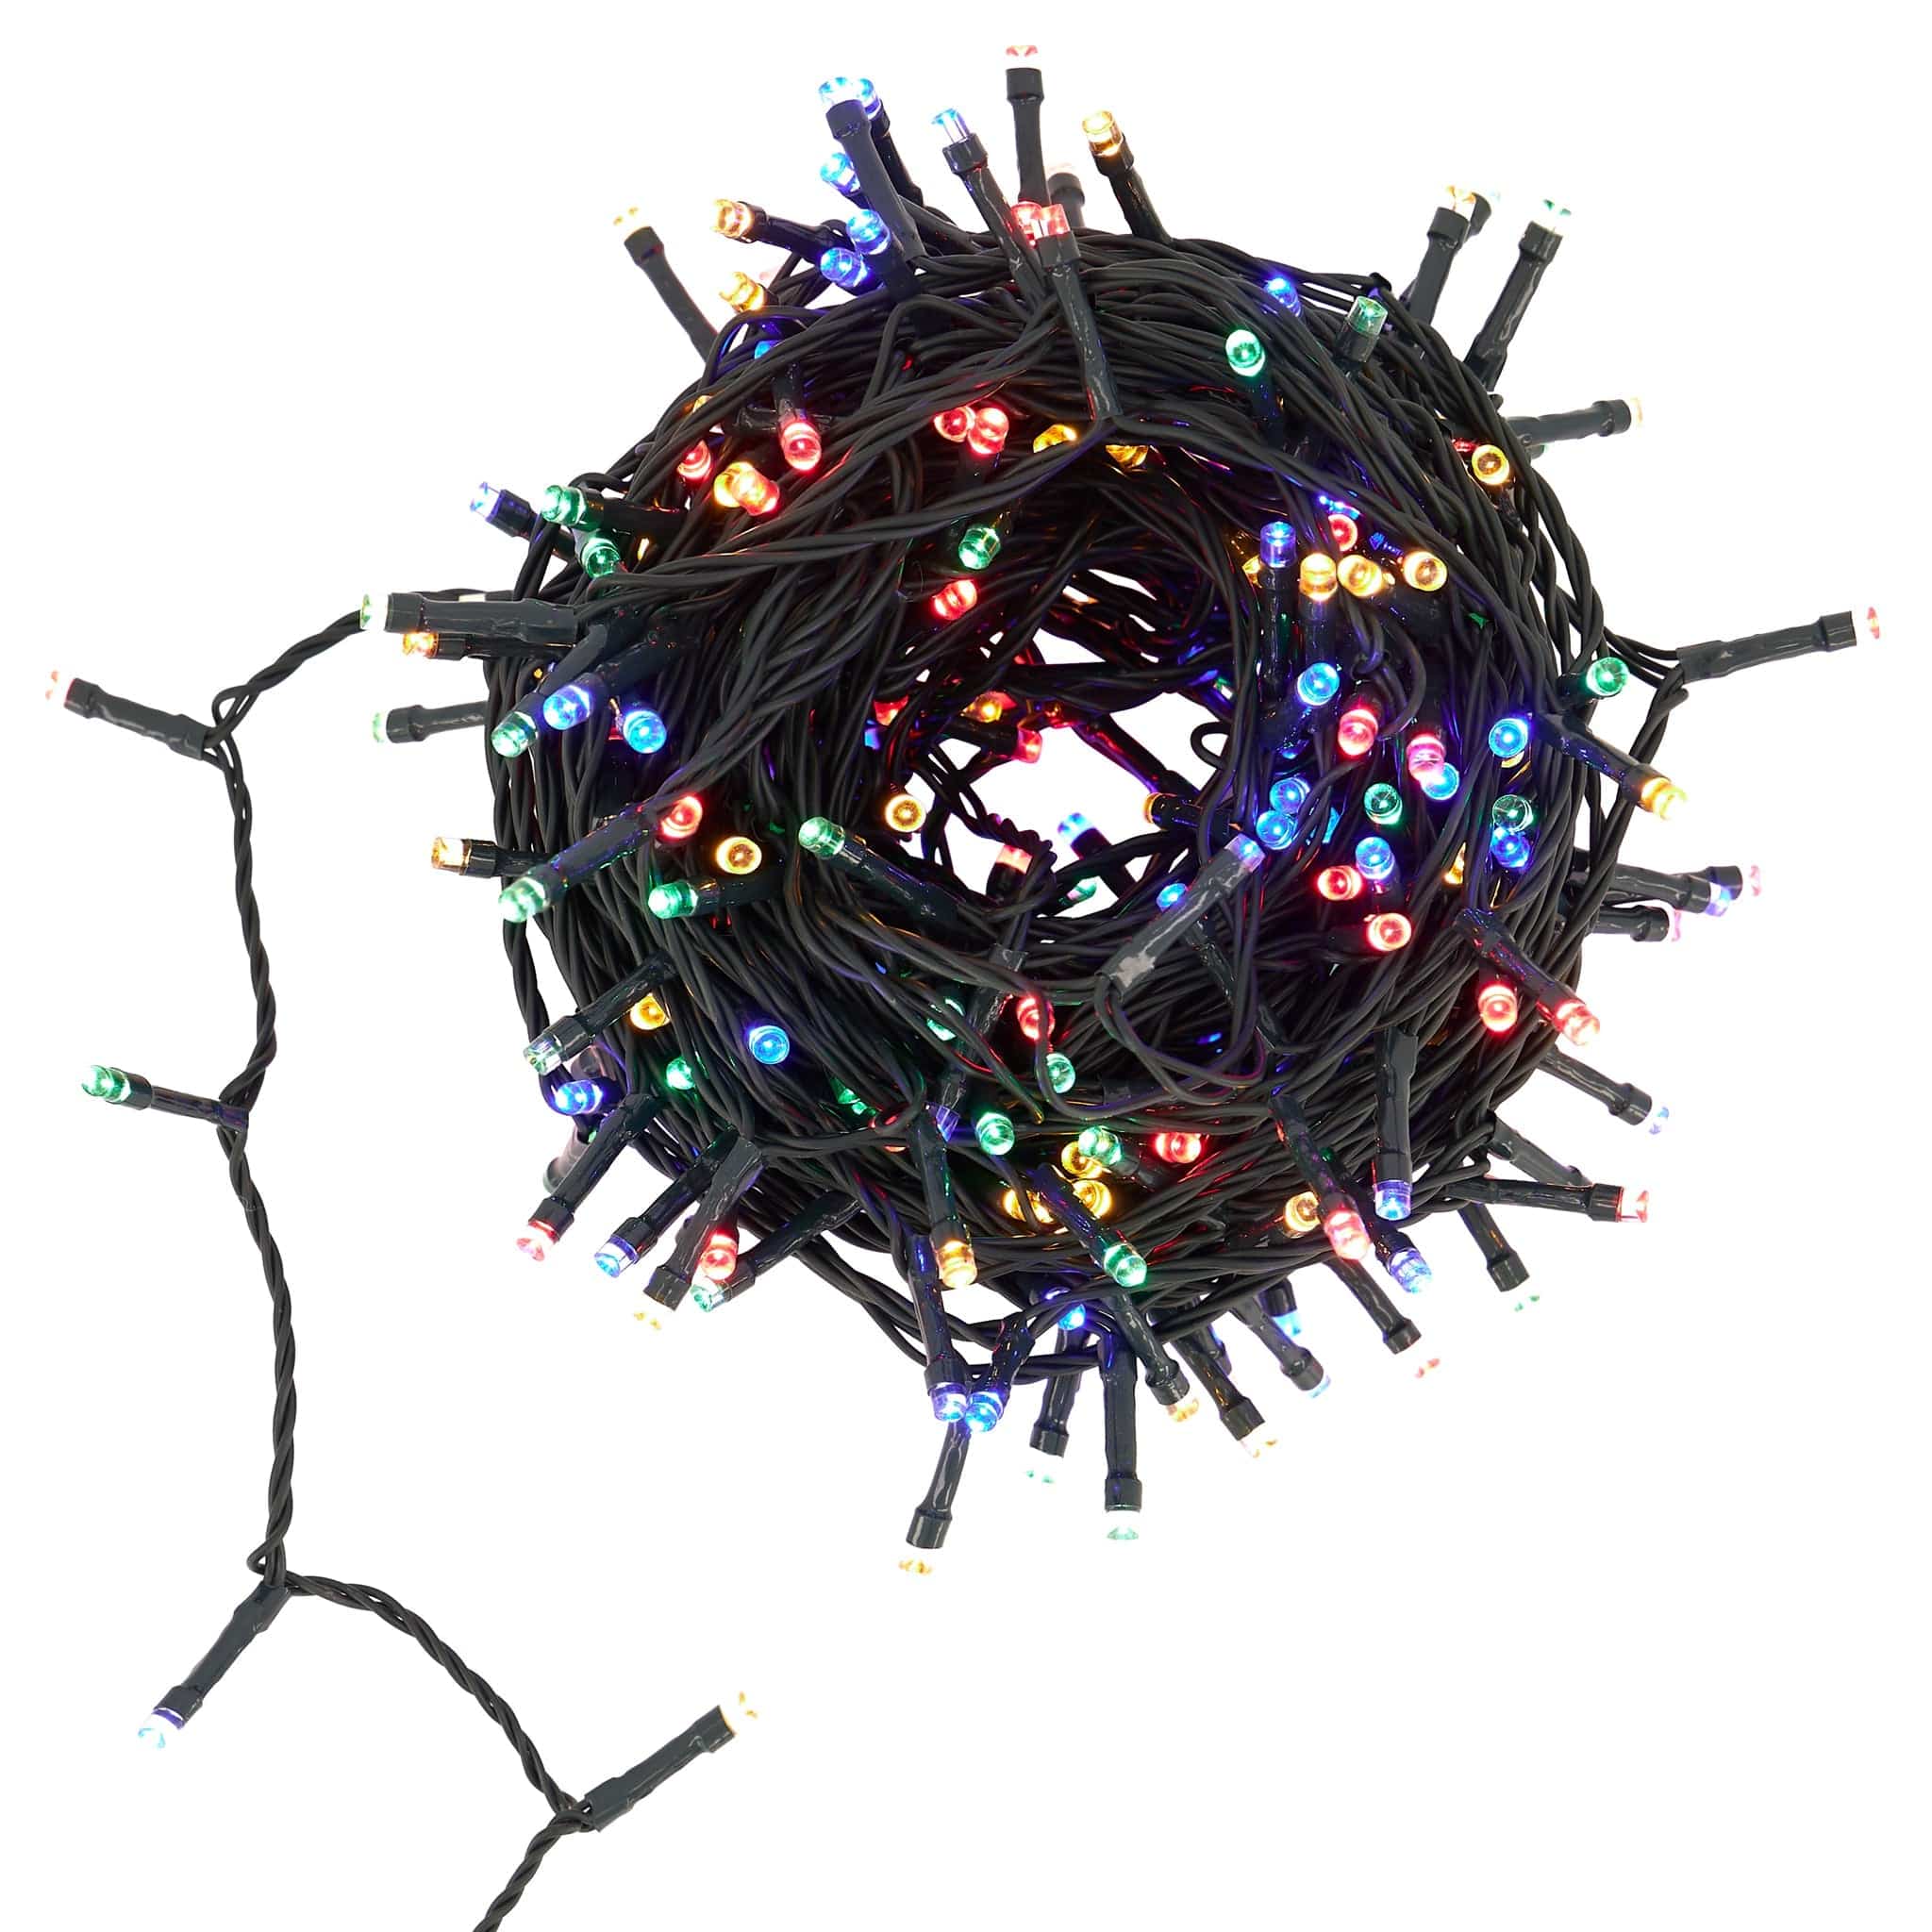 Indoor/Outdoor 8 Function LED Waterproof Fairy Lights with Green Cable (800 Lights - 60M Cable) - Multicoloured 8800225811649 only5pounds-com